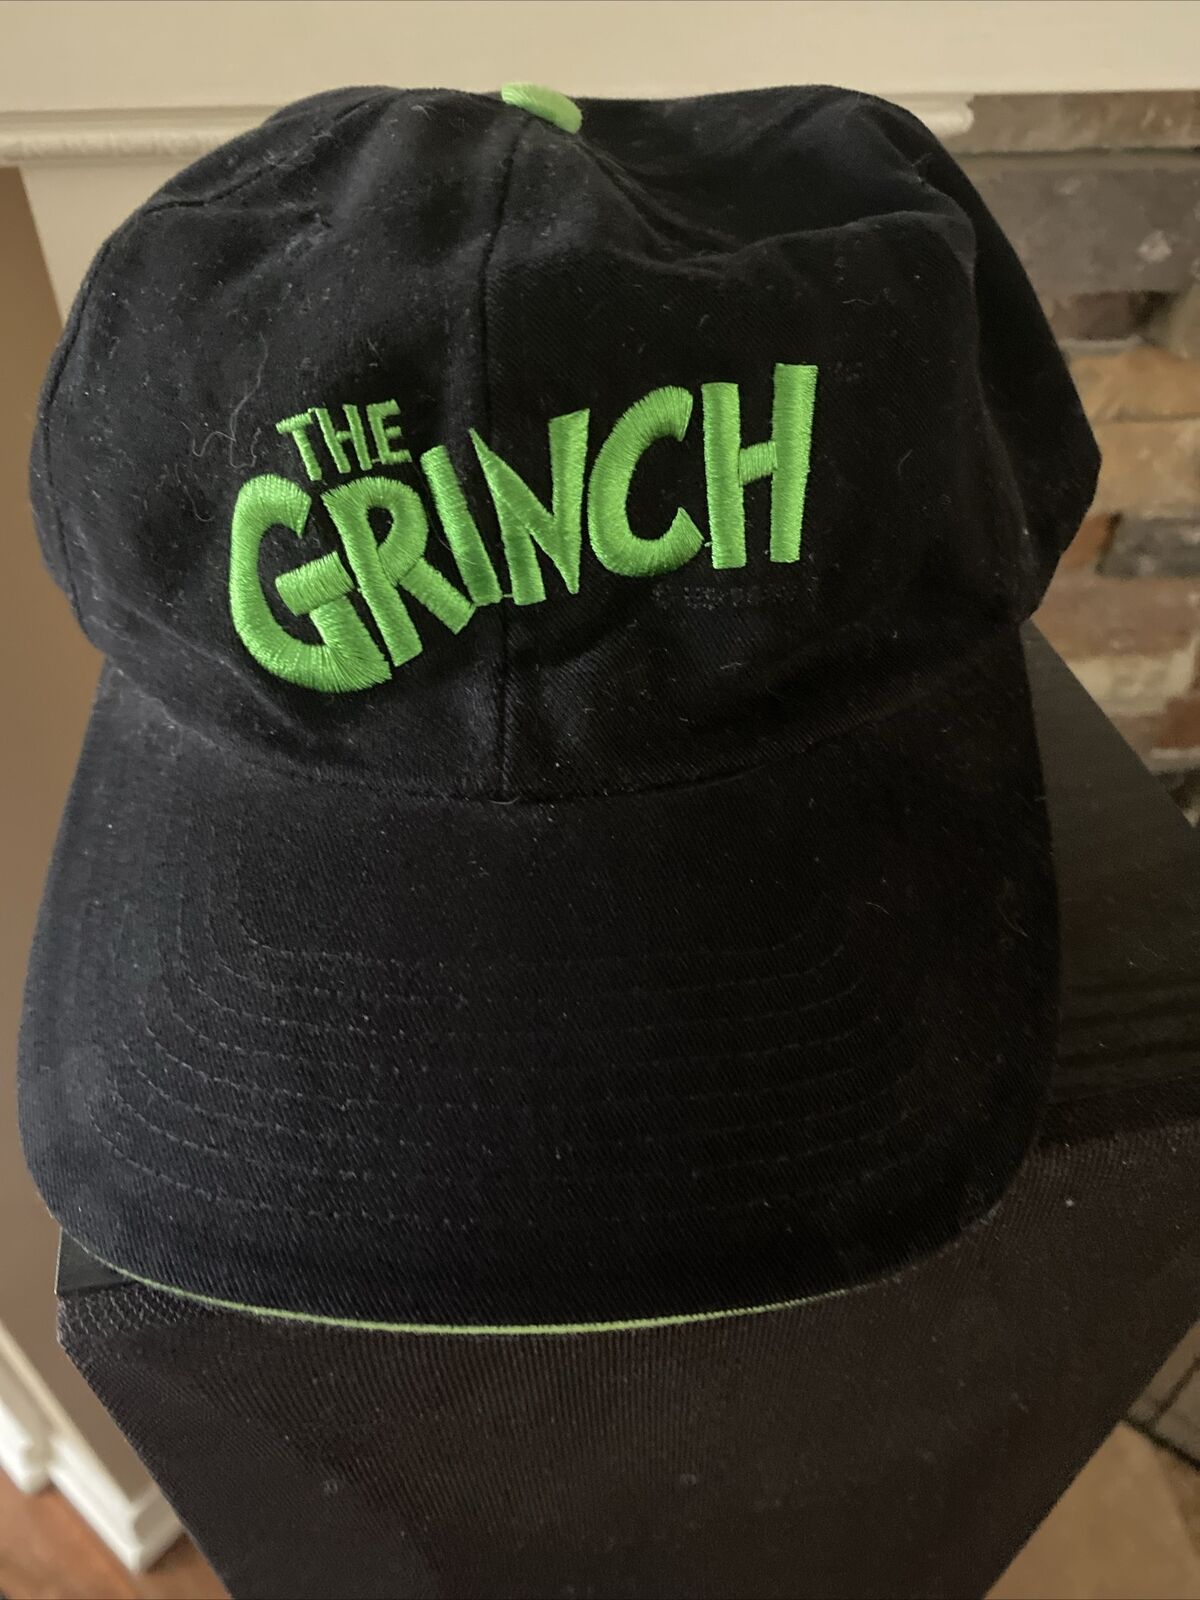 2000 Dr. Seuss “The Grinch” From Movie Premier Black Hat